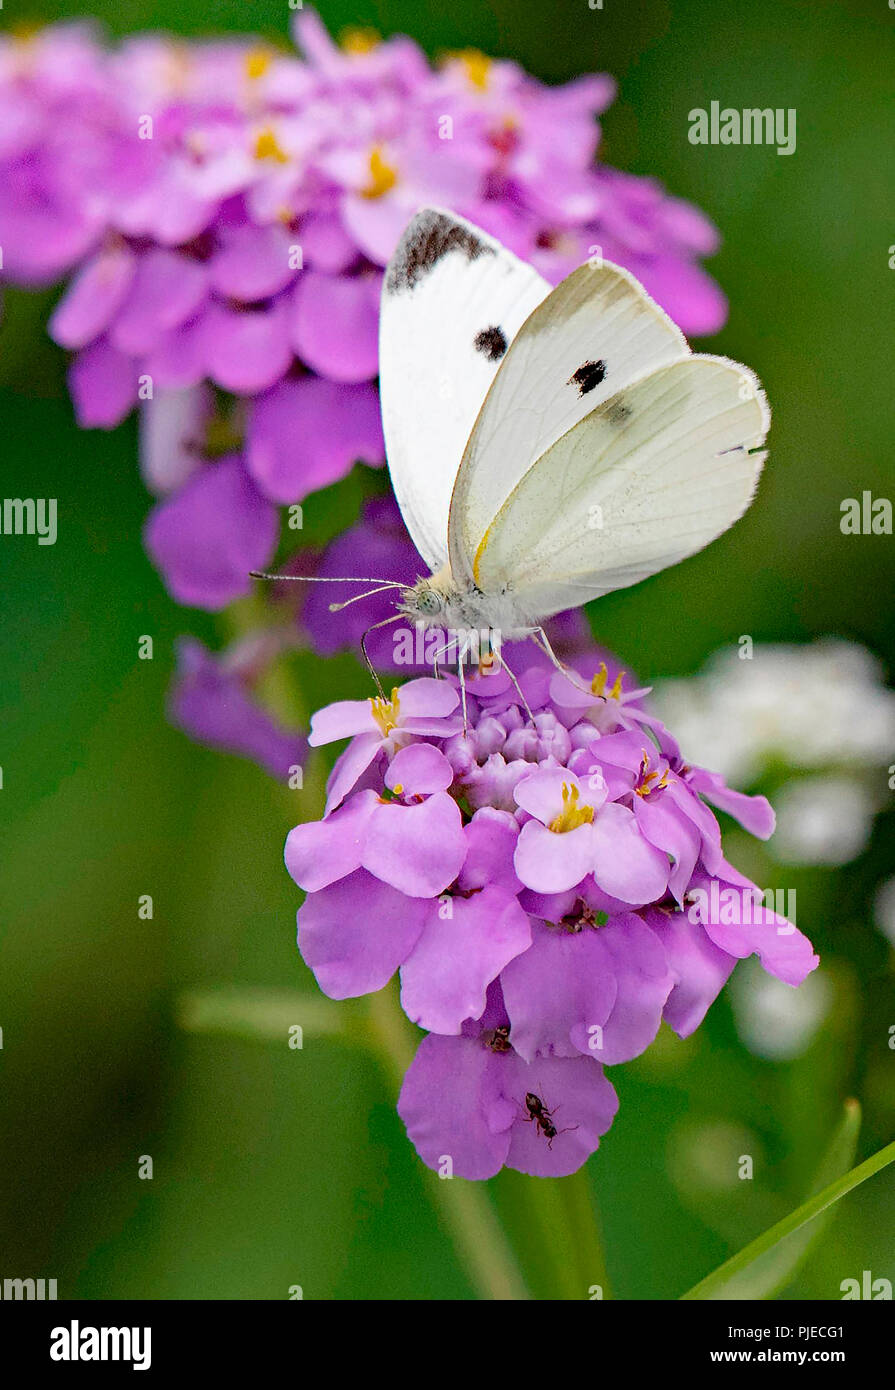 Great Southern White Butterfly, Male on Geranium Flowers Stock Photo